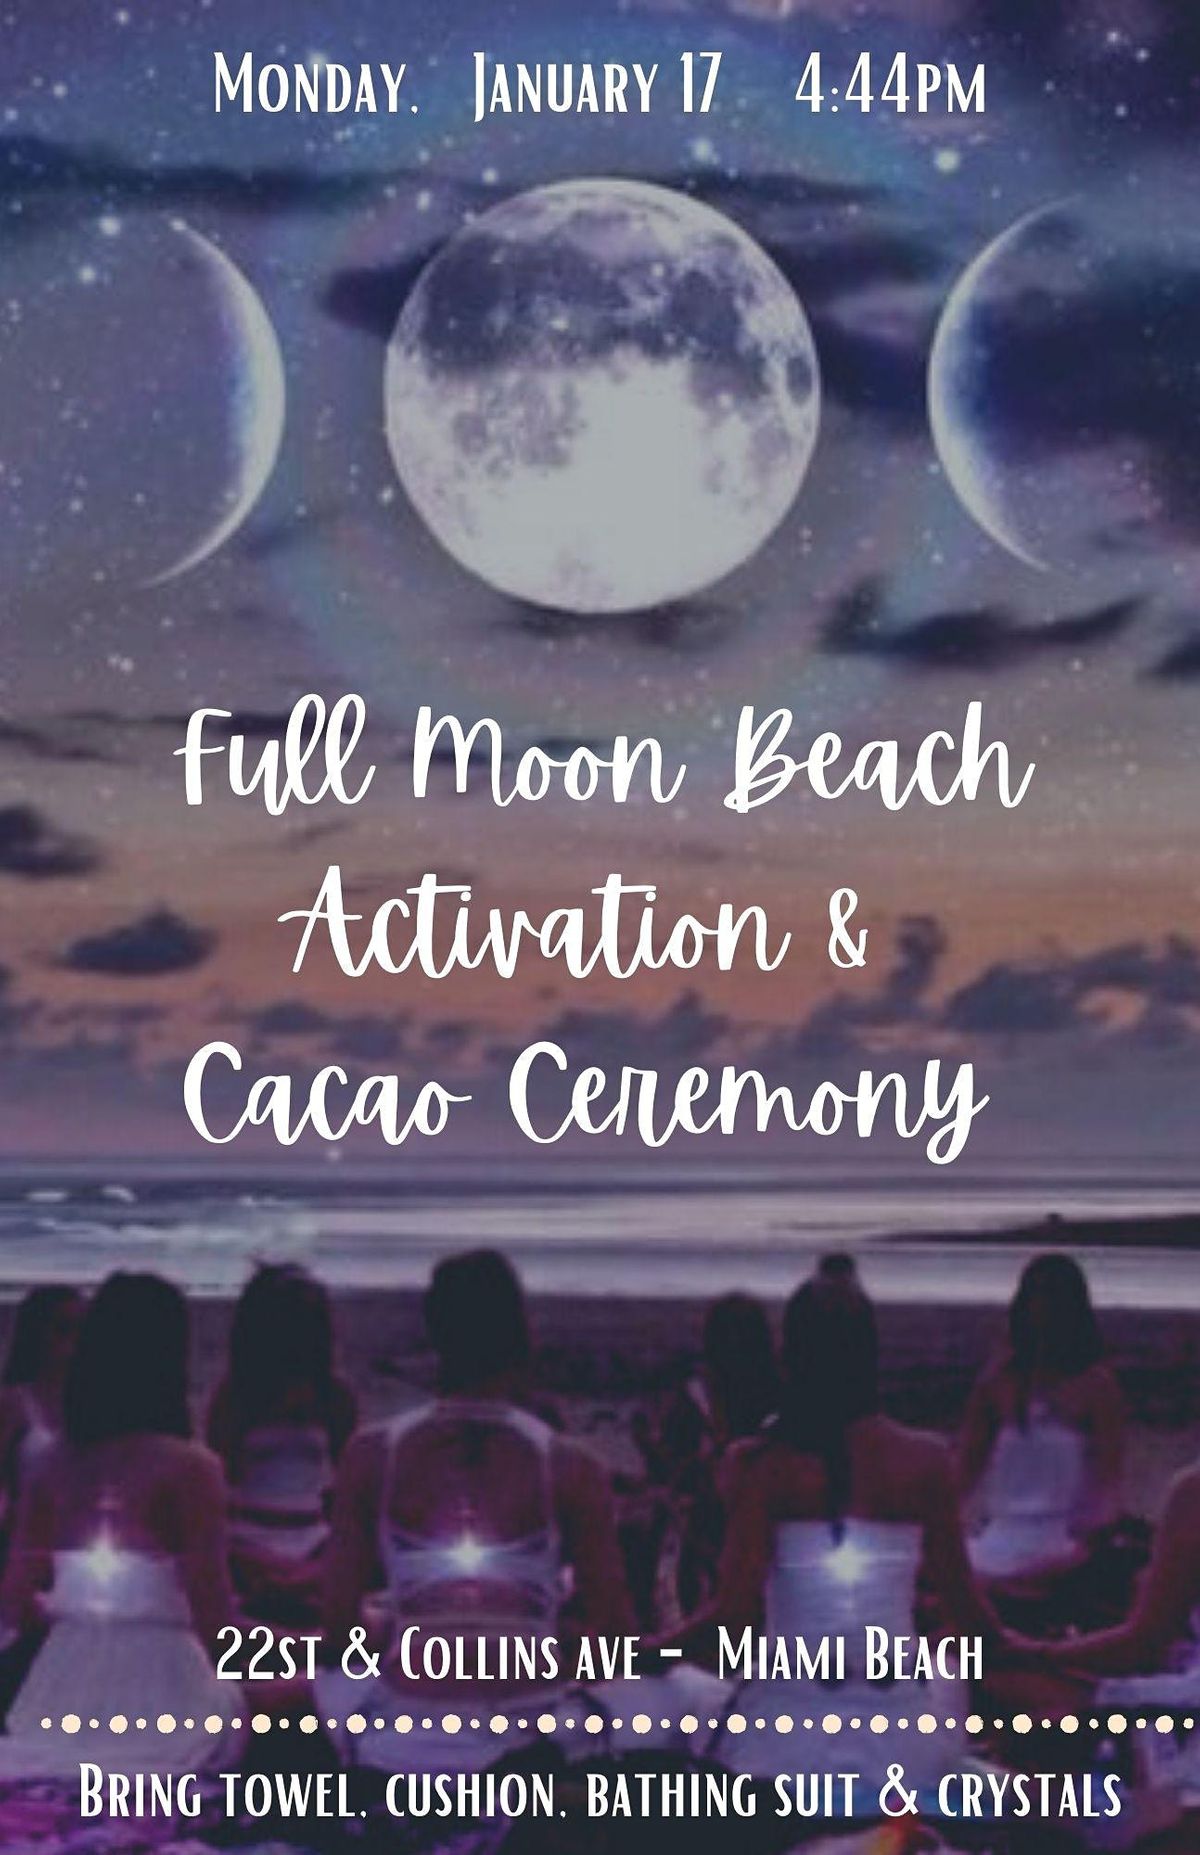 Full Moon Beach Activation & Cacao Ceremony